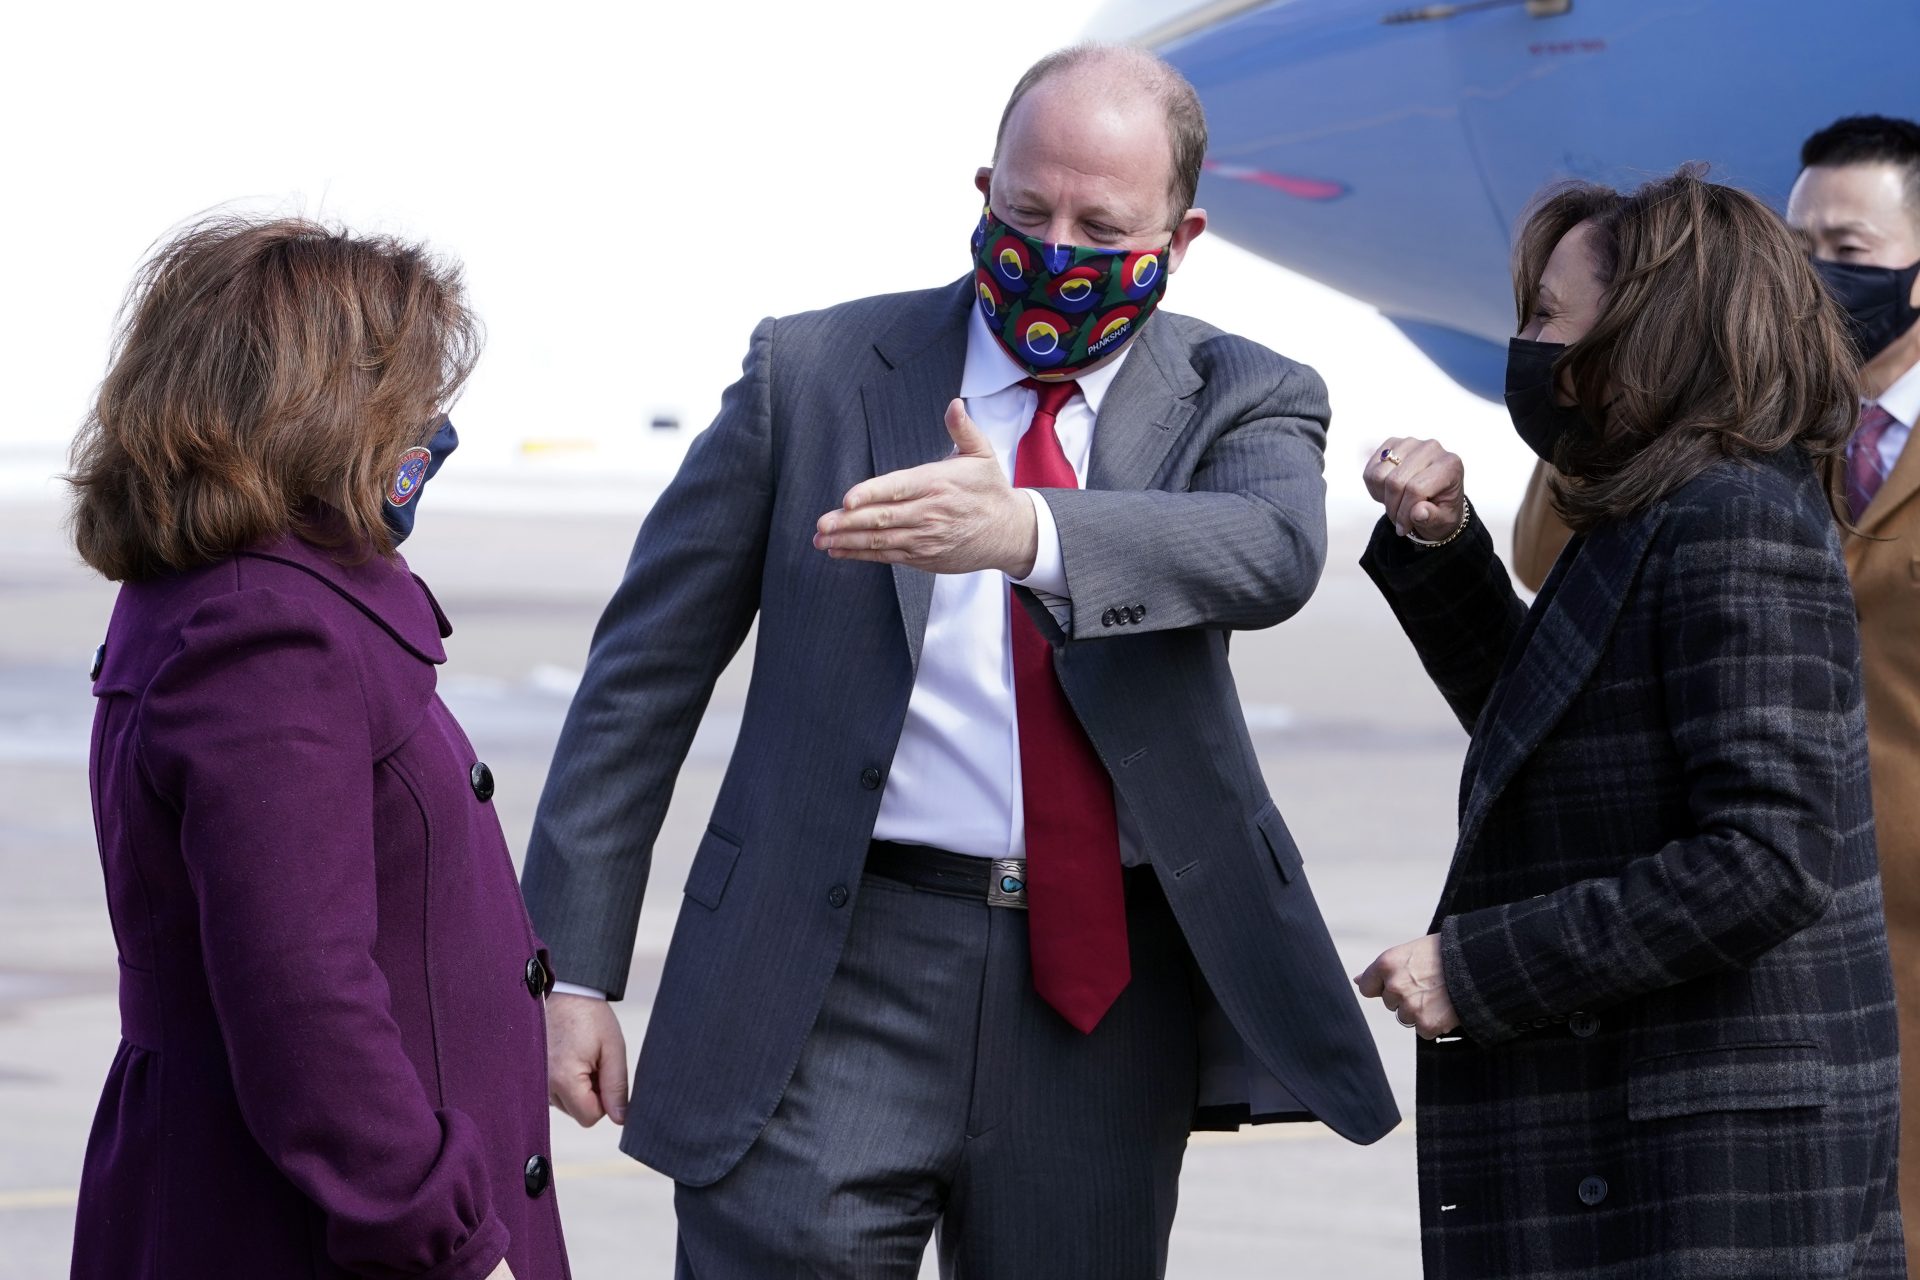 Vice President Kamala Harris are greeted by Colorado Gov. Jared Polis and Colorado Lt. Gov. Dianne Primavera on arrival in Denver, Tuesday March 16, 2021.